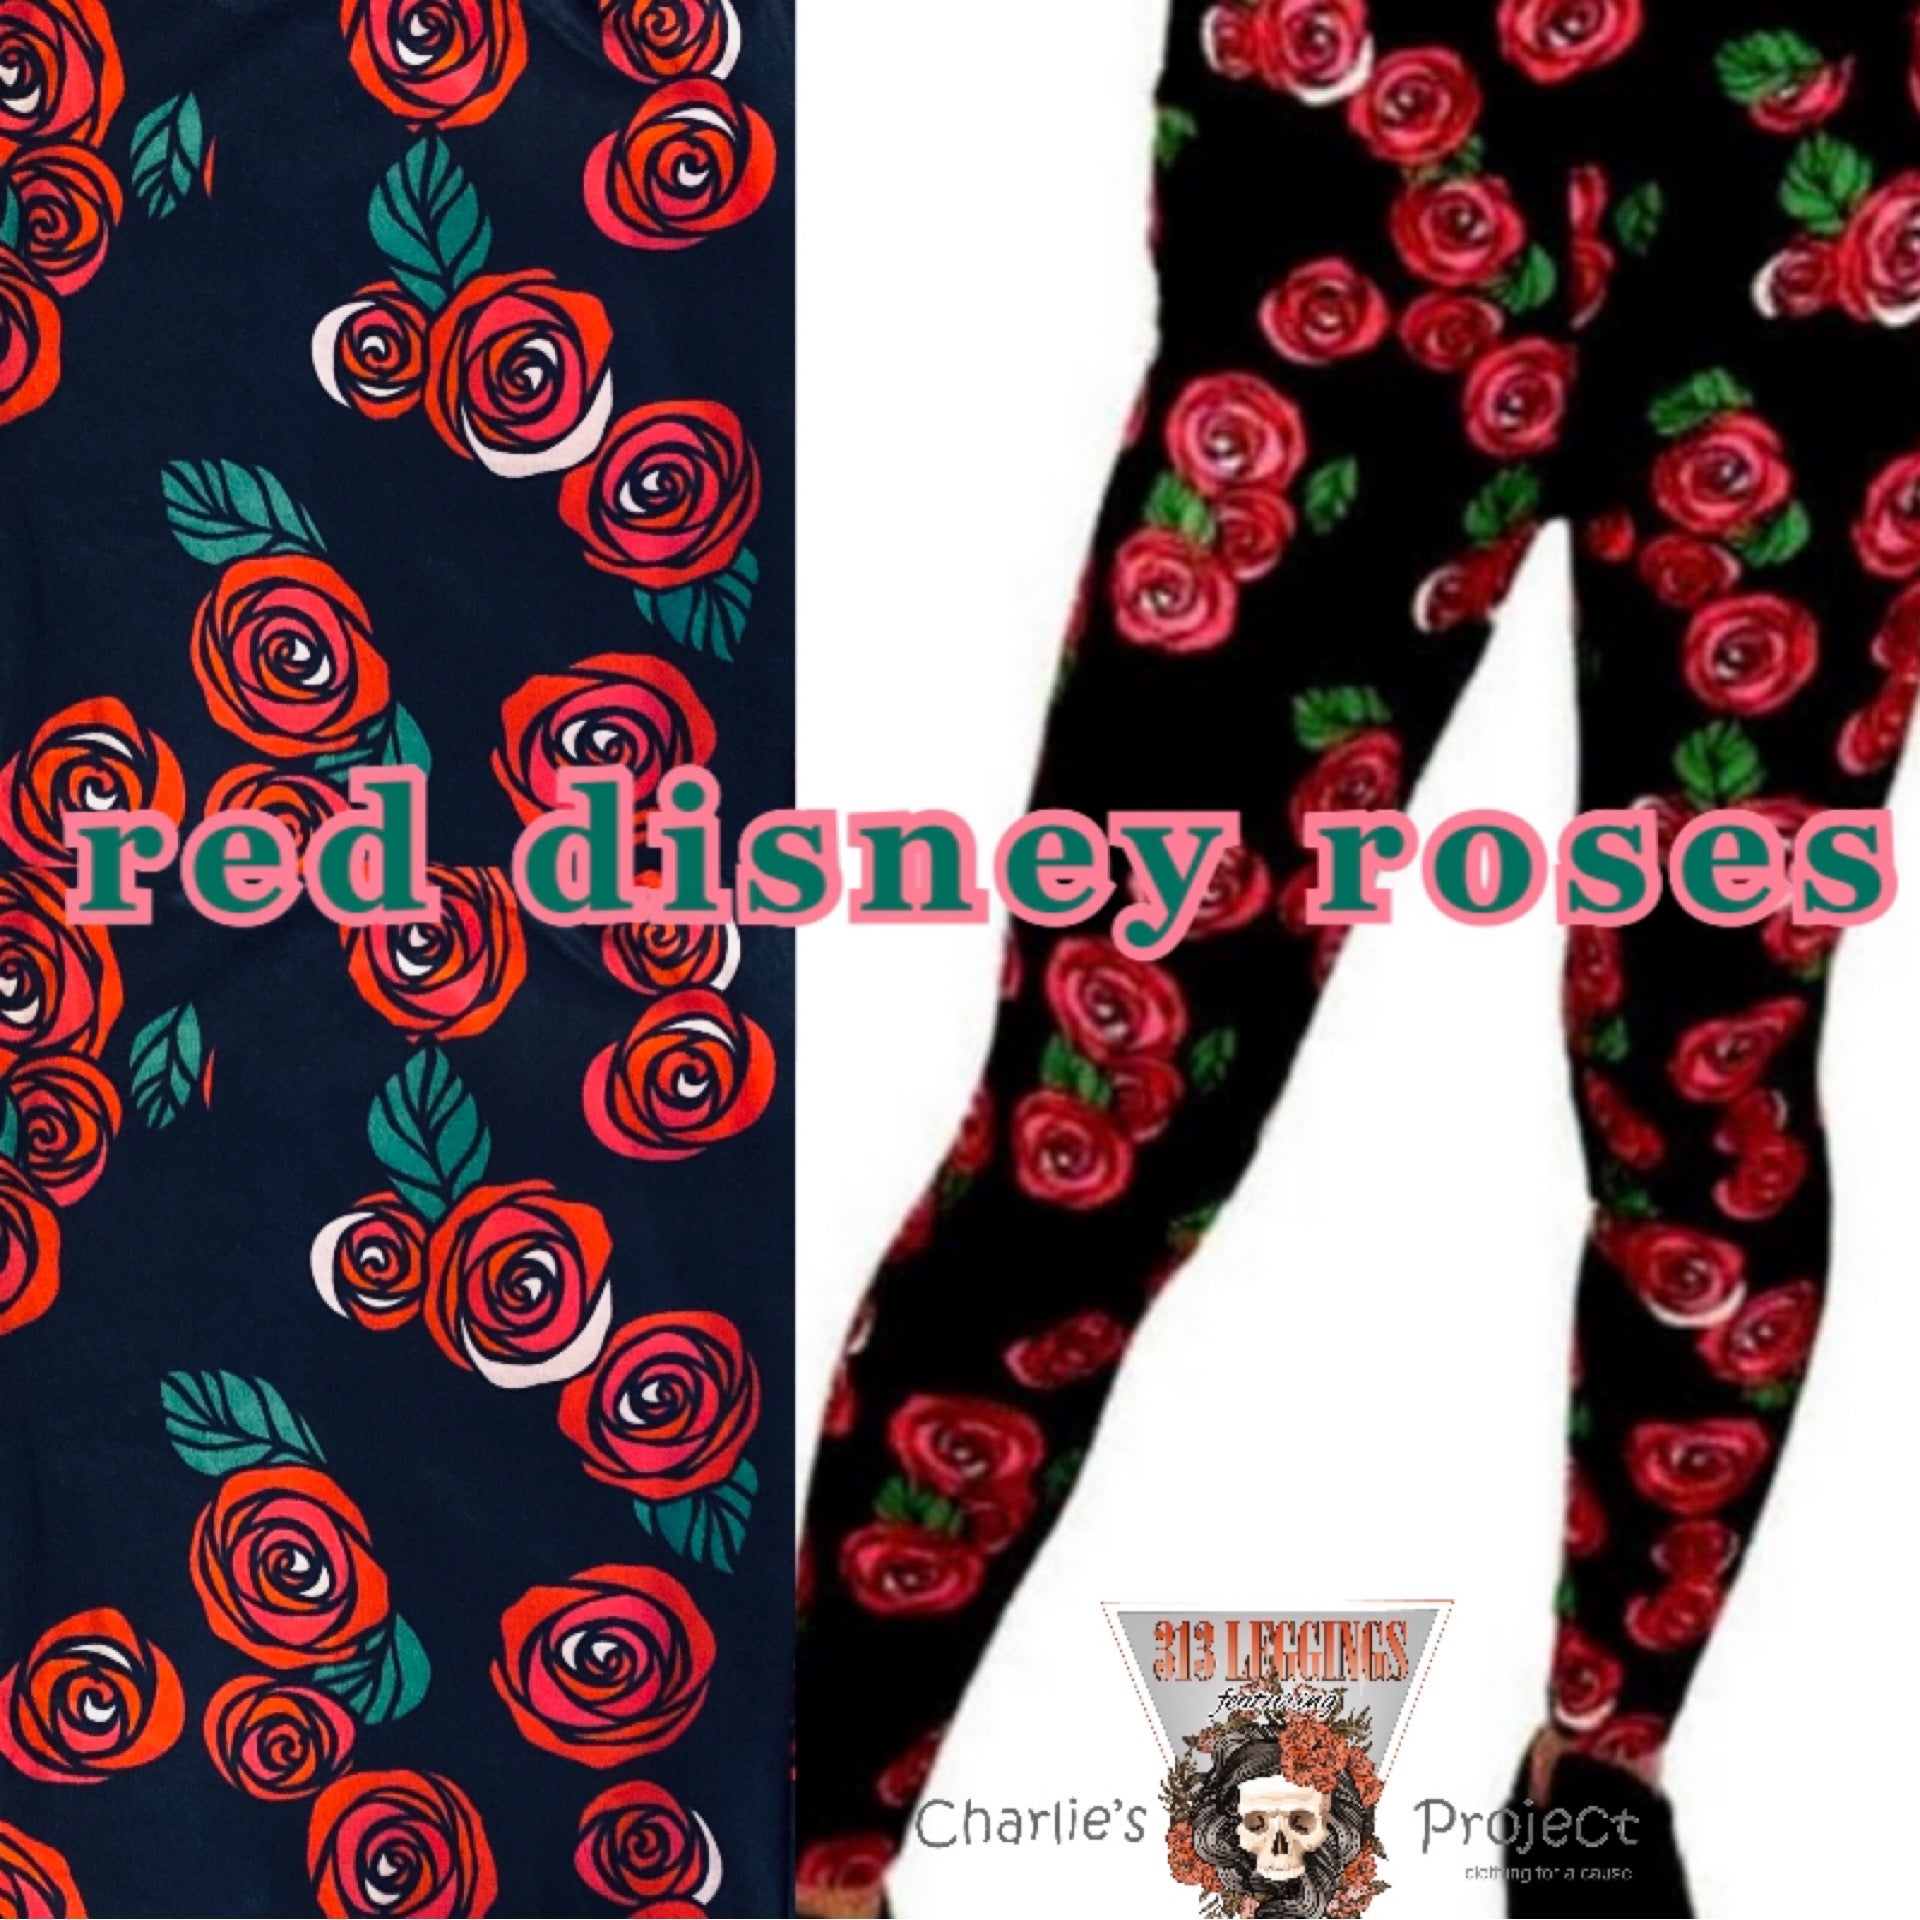 Red Disney Roses Leggings SALE  Charlie's Project with 313 Leggings  Boutique!